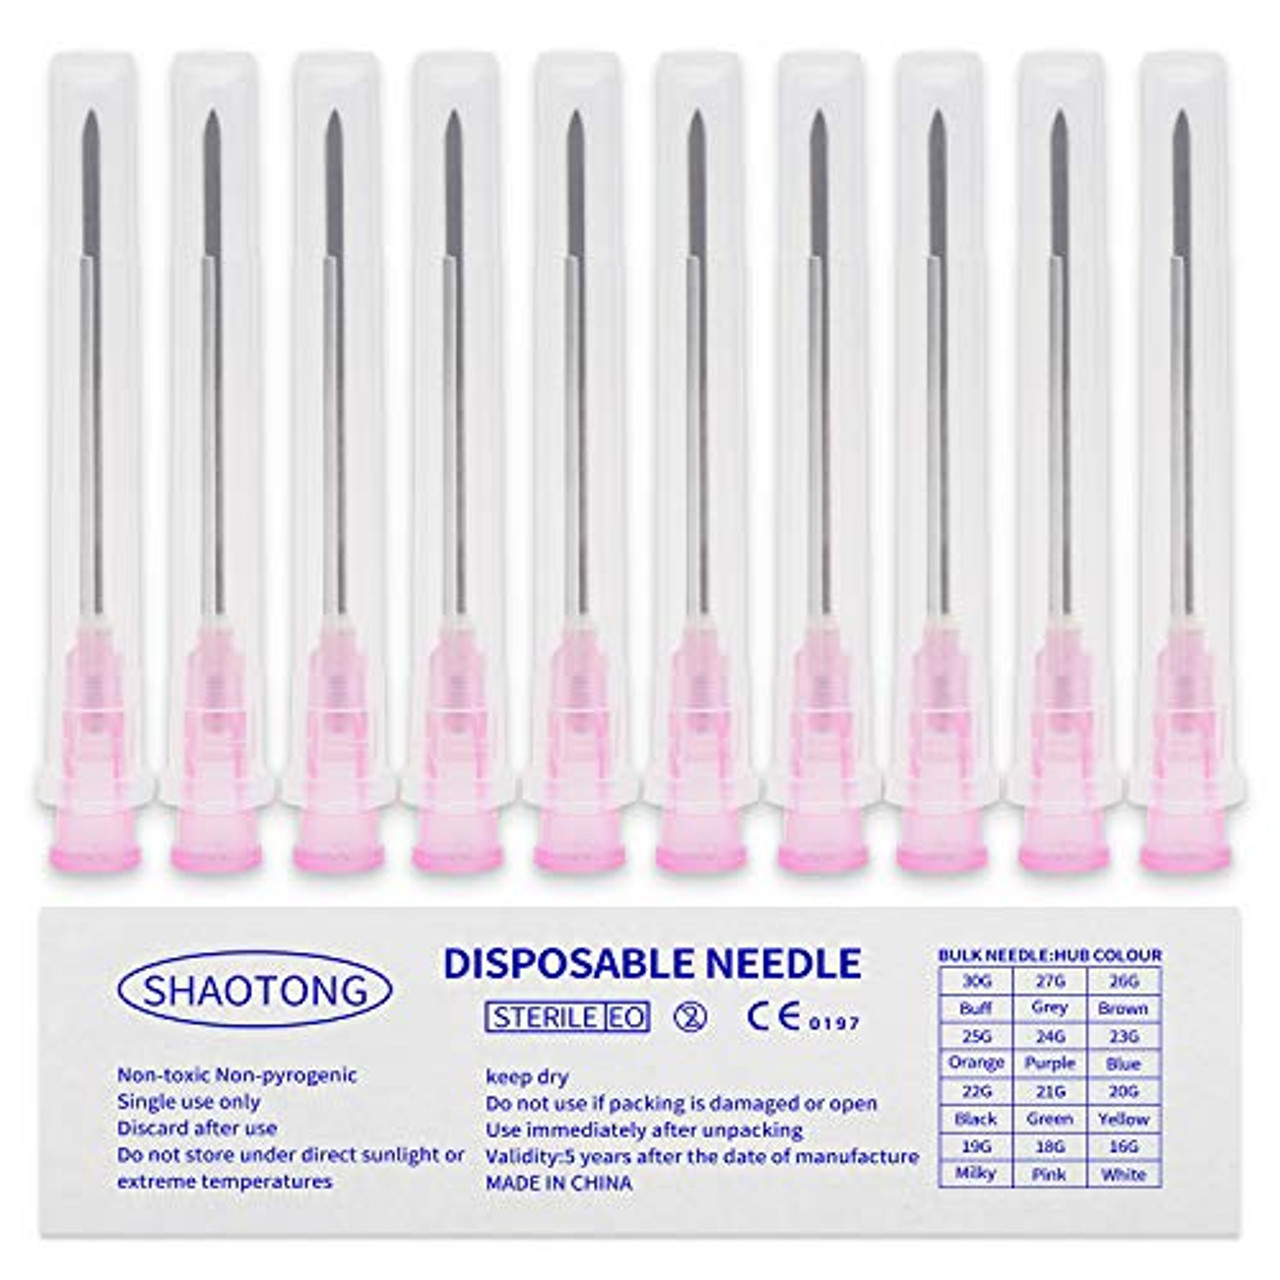 18ga 1.2 38mm Plastic Sterile Needles Tips Disposable Injection